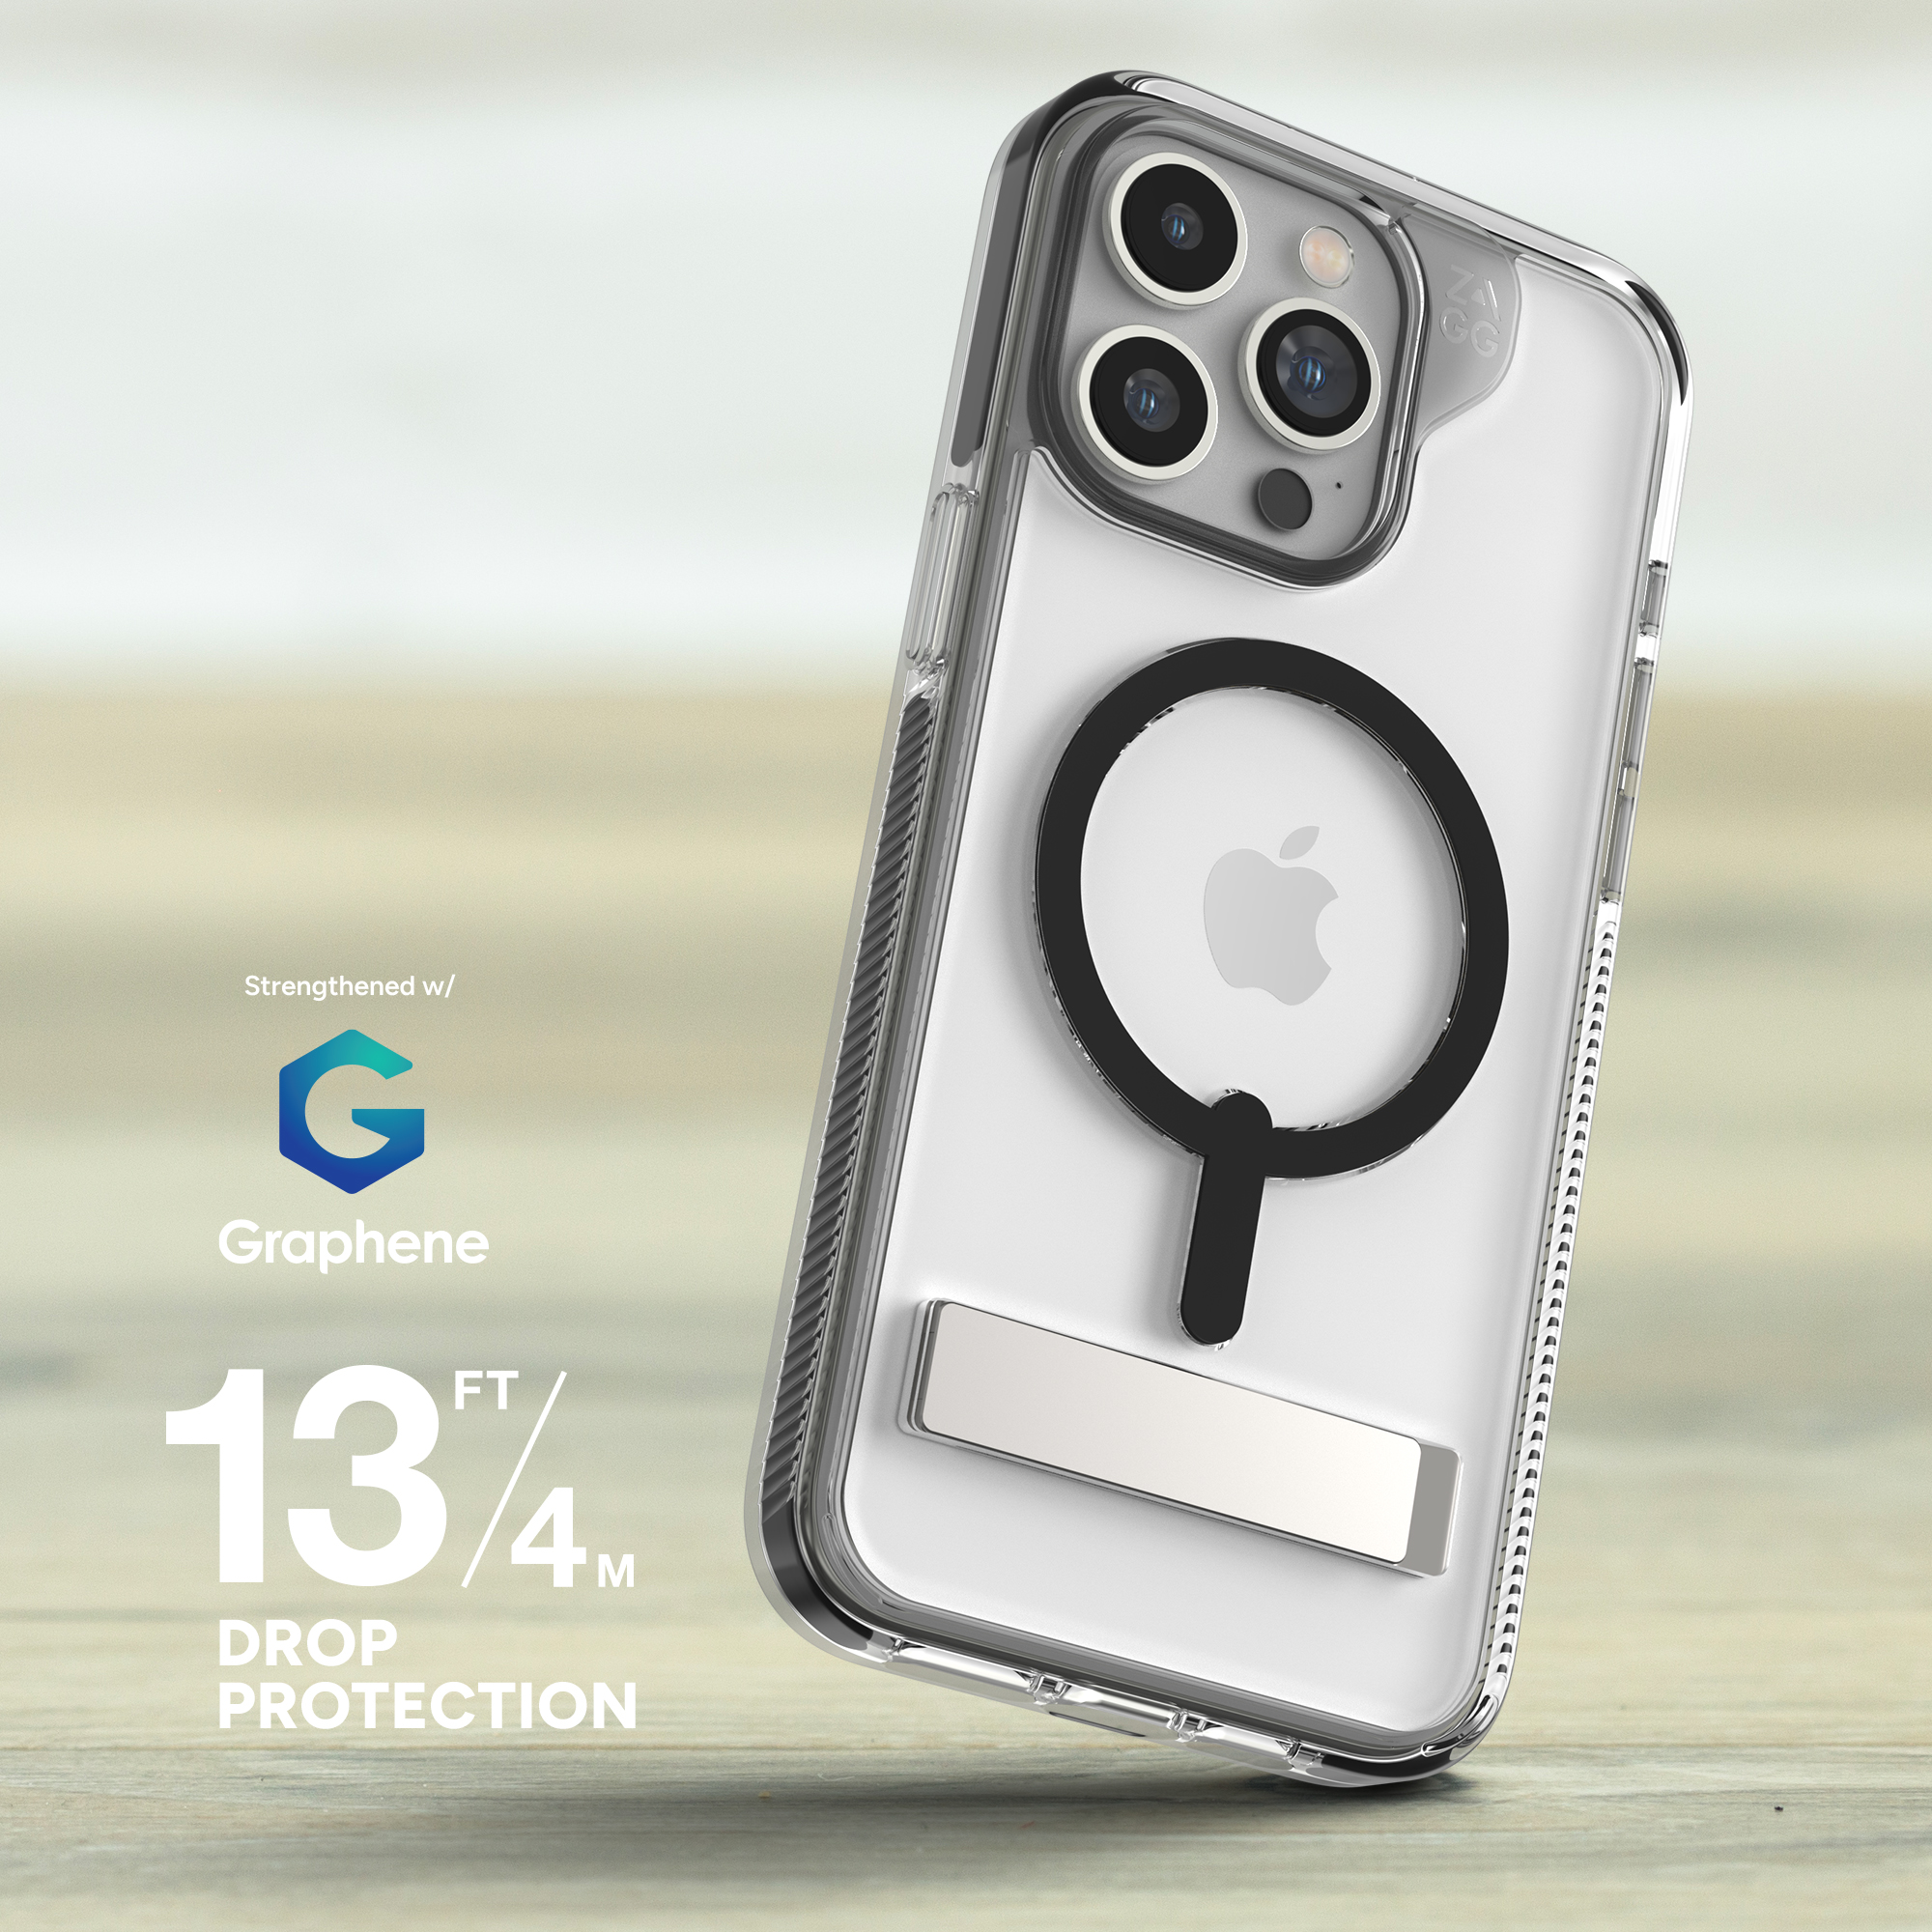 Drop Resistant up to 13ft | 4m||
Santa Cruz Snap with Kickstand protects your phone from drops up to 13 feet (4 meters).